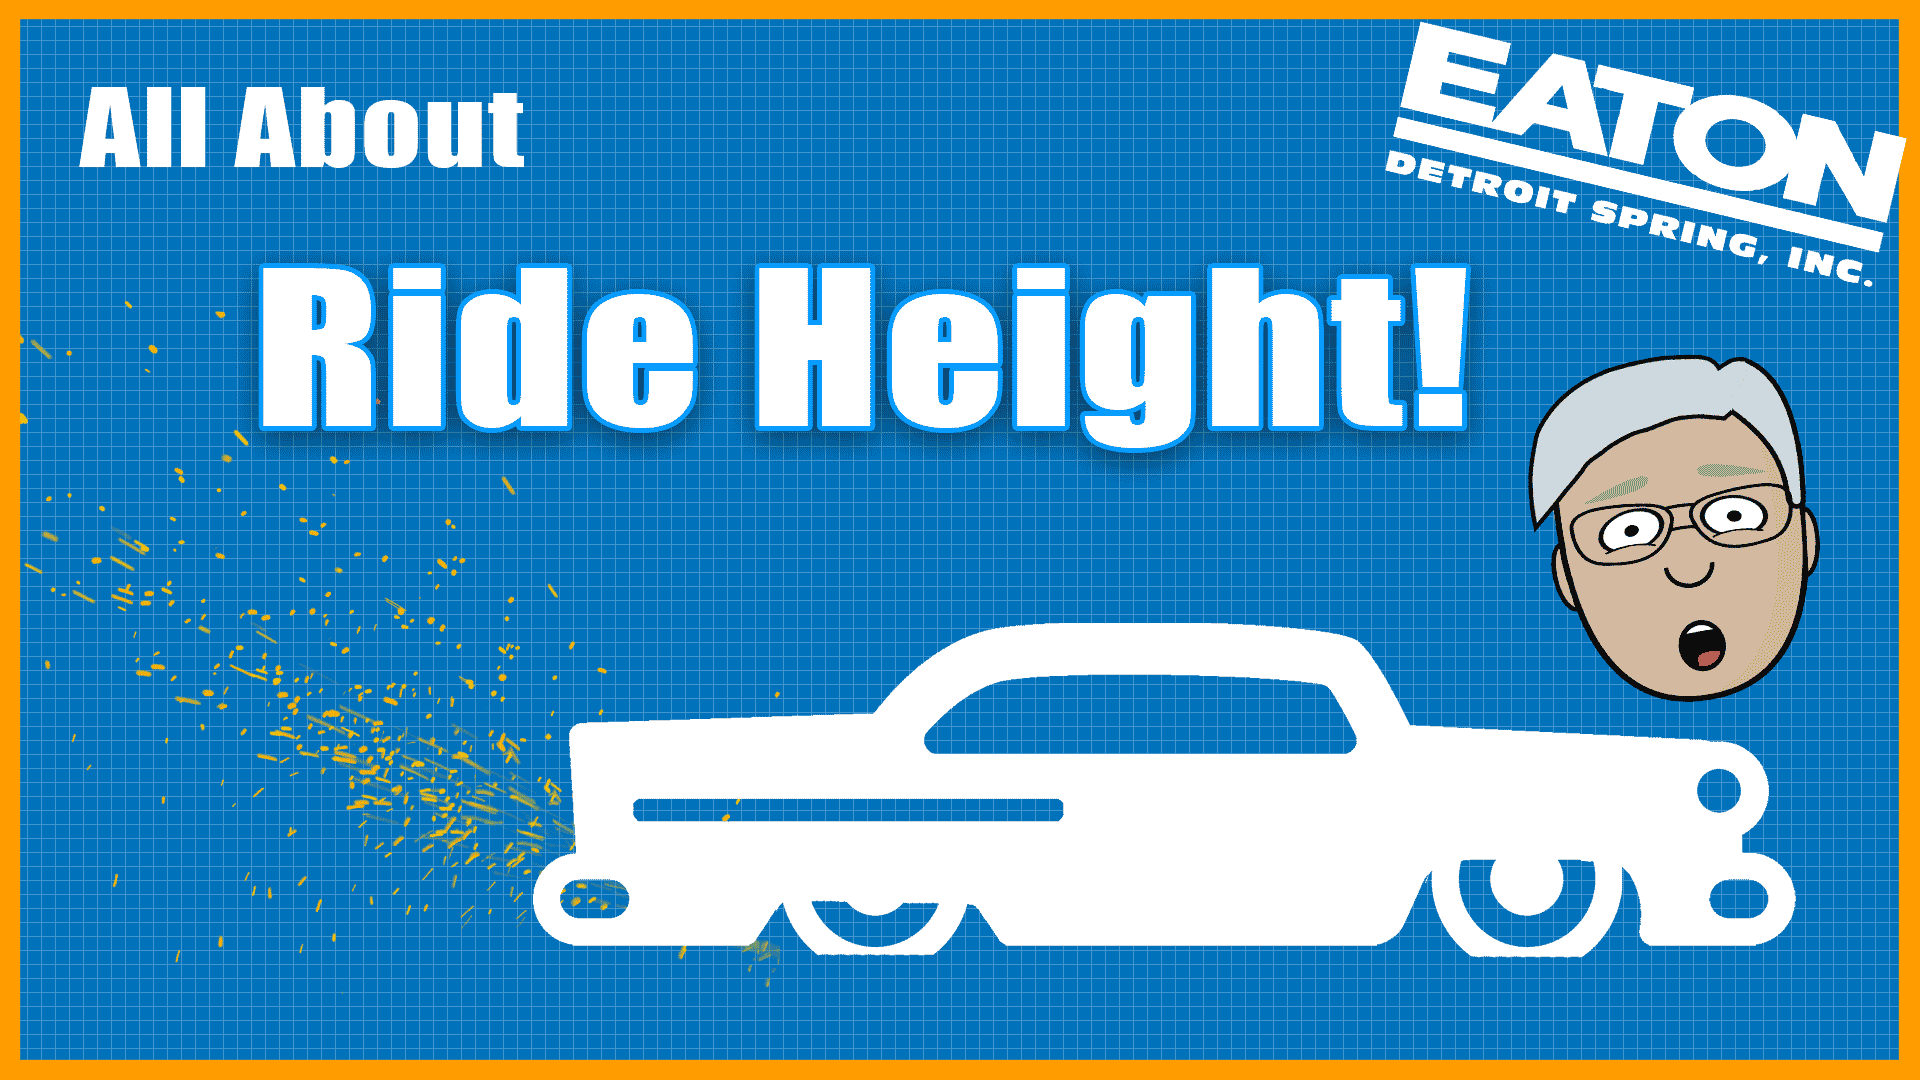 All About Ride Height